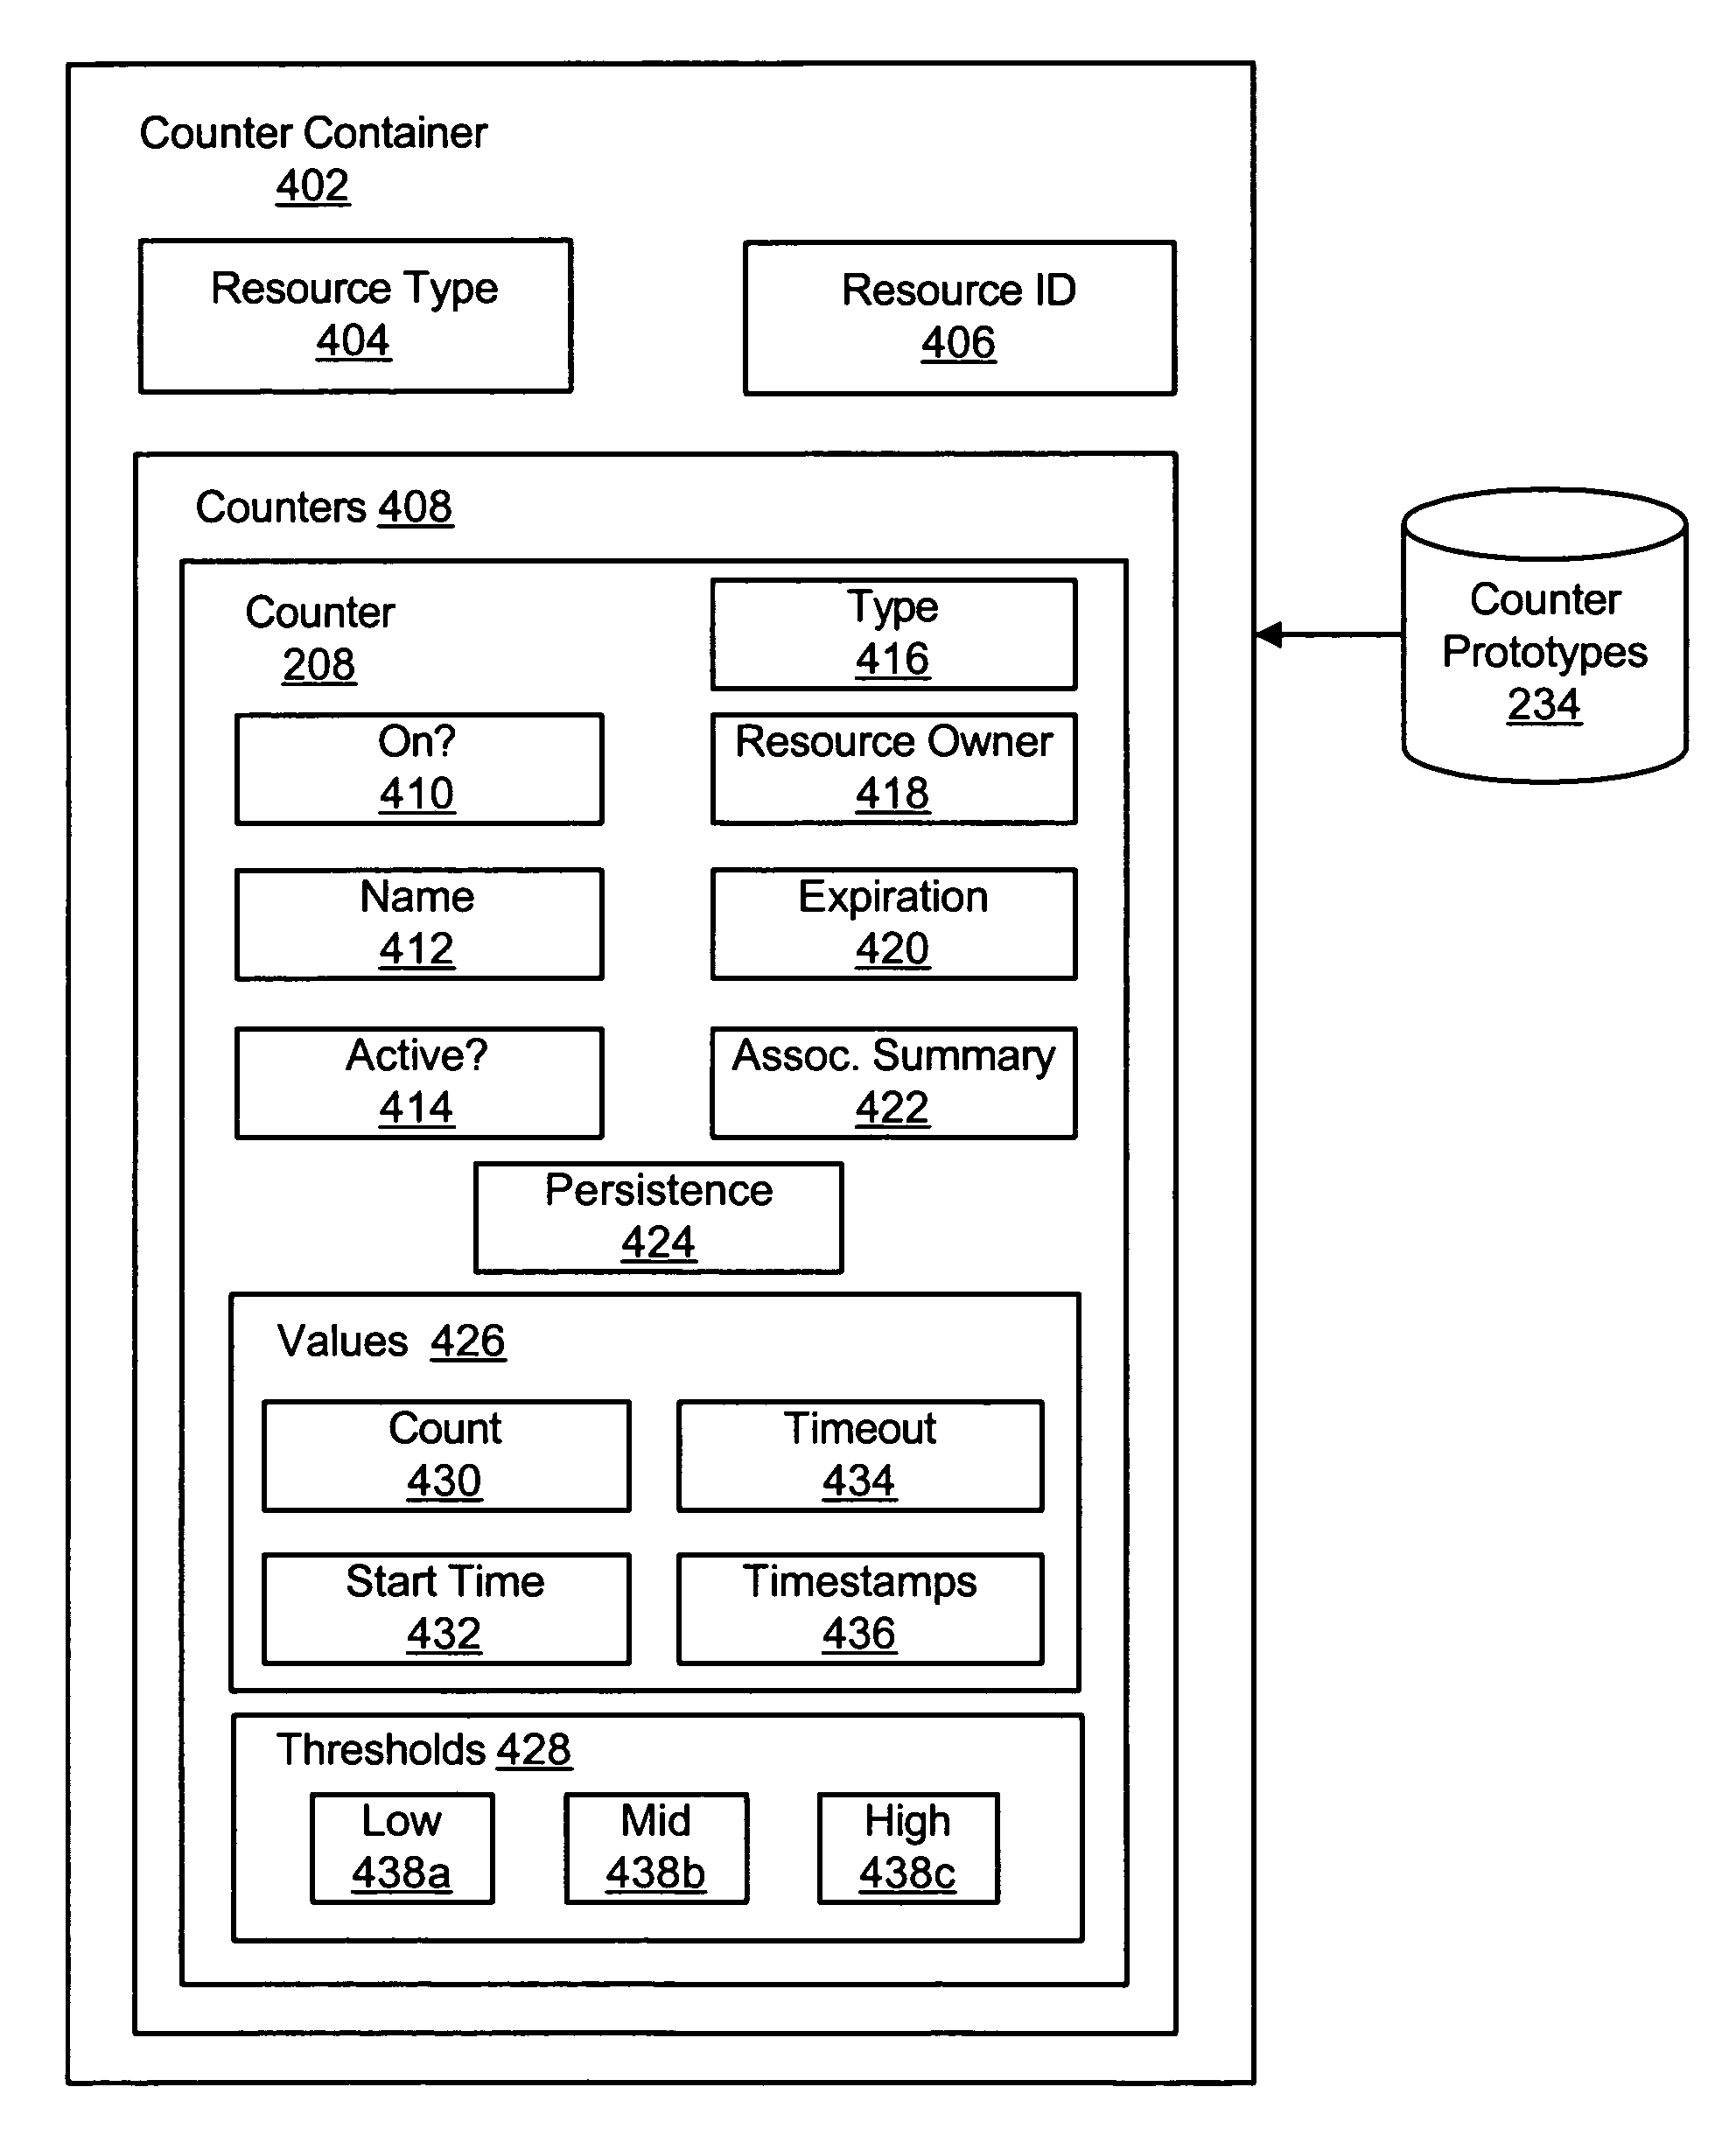 Apparatus, system, and method for facilitating monitoring and responding to error events